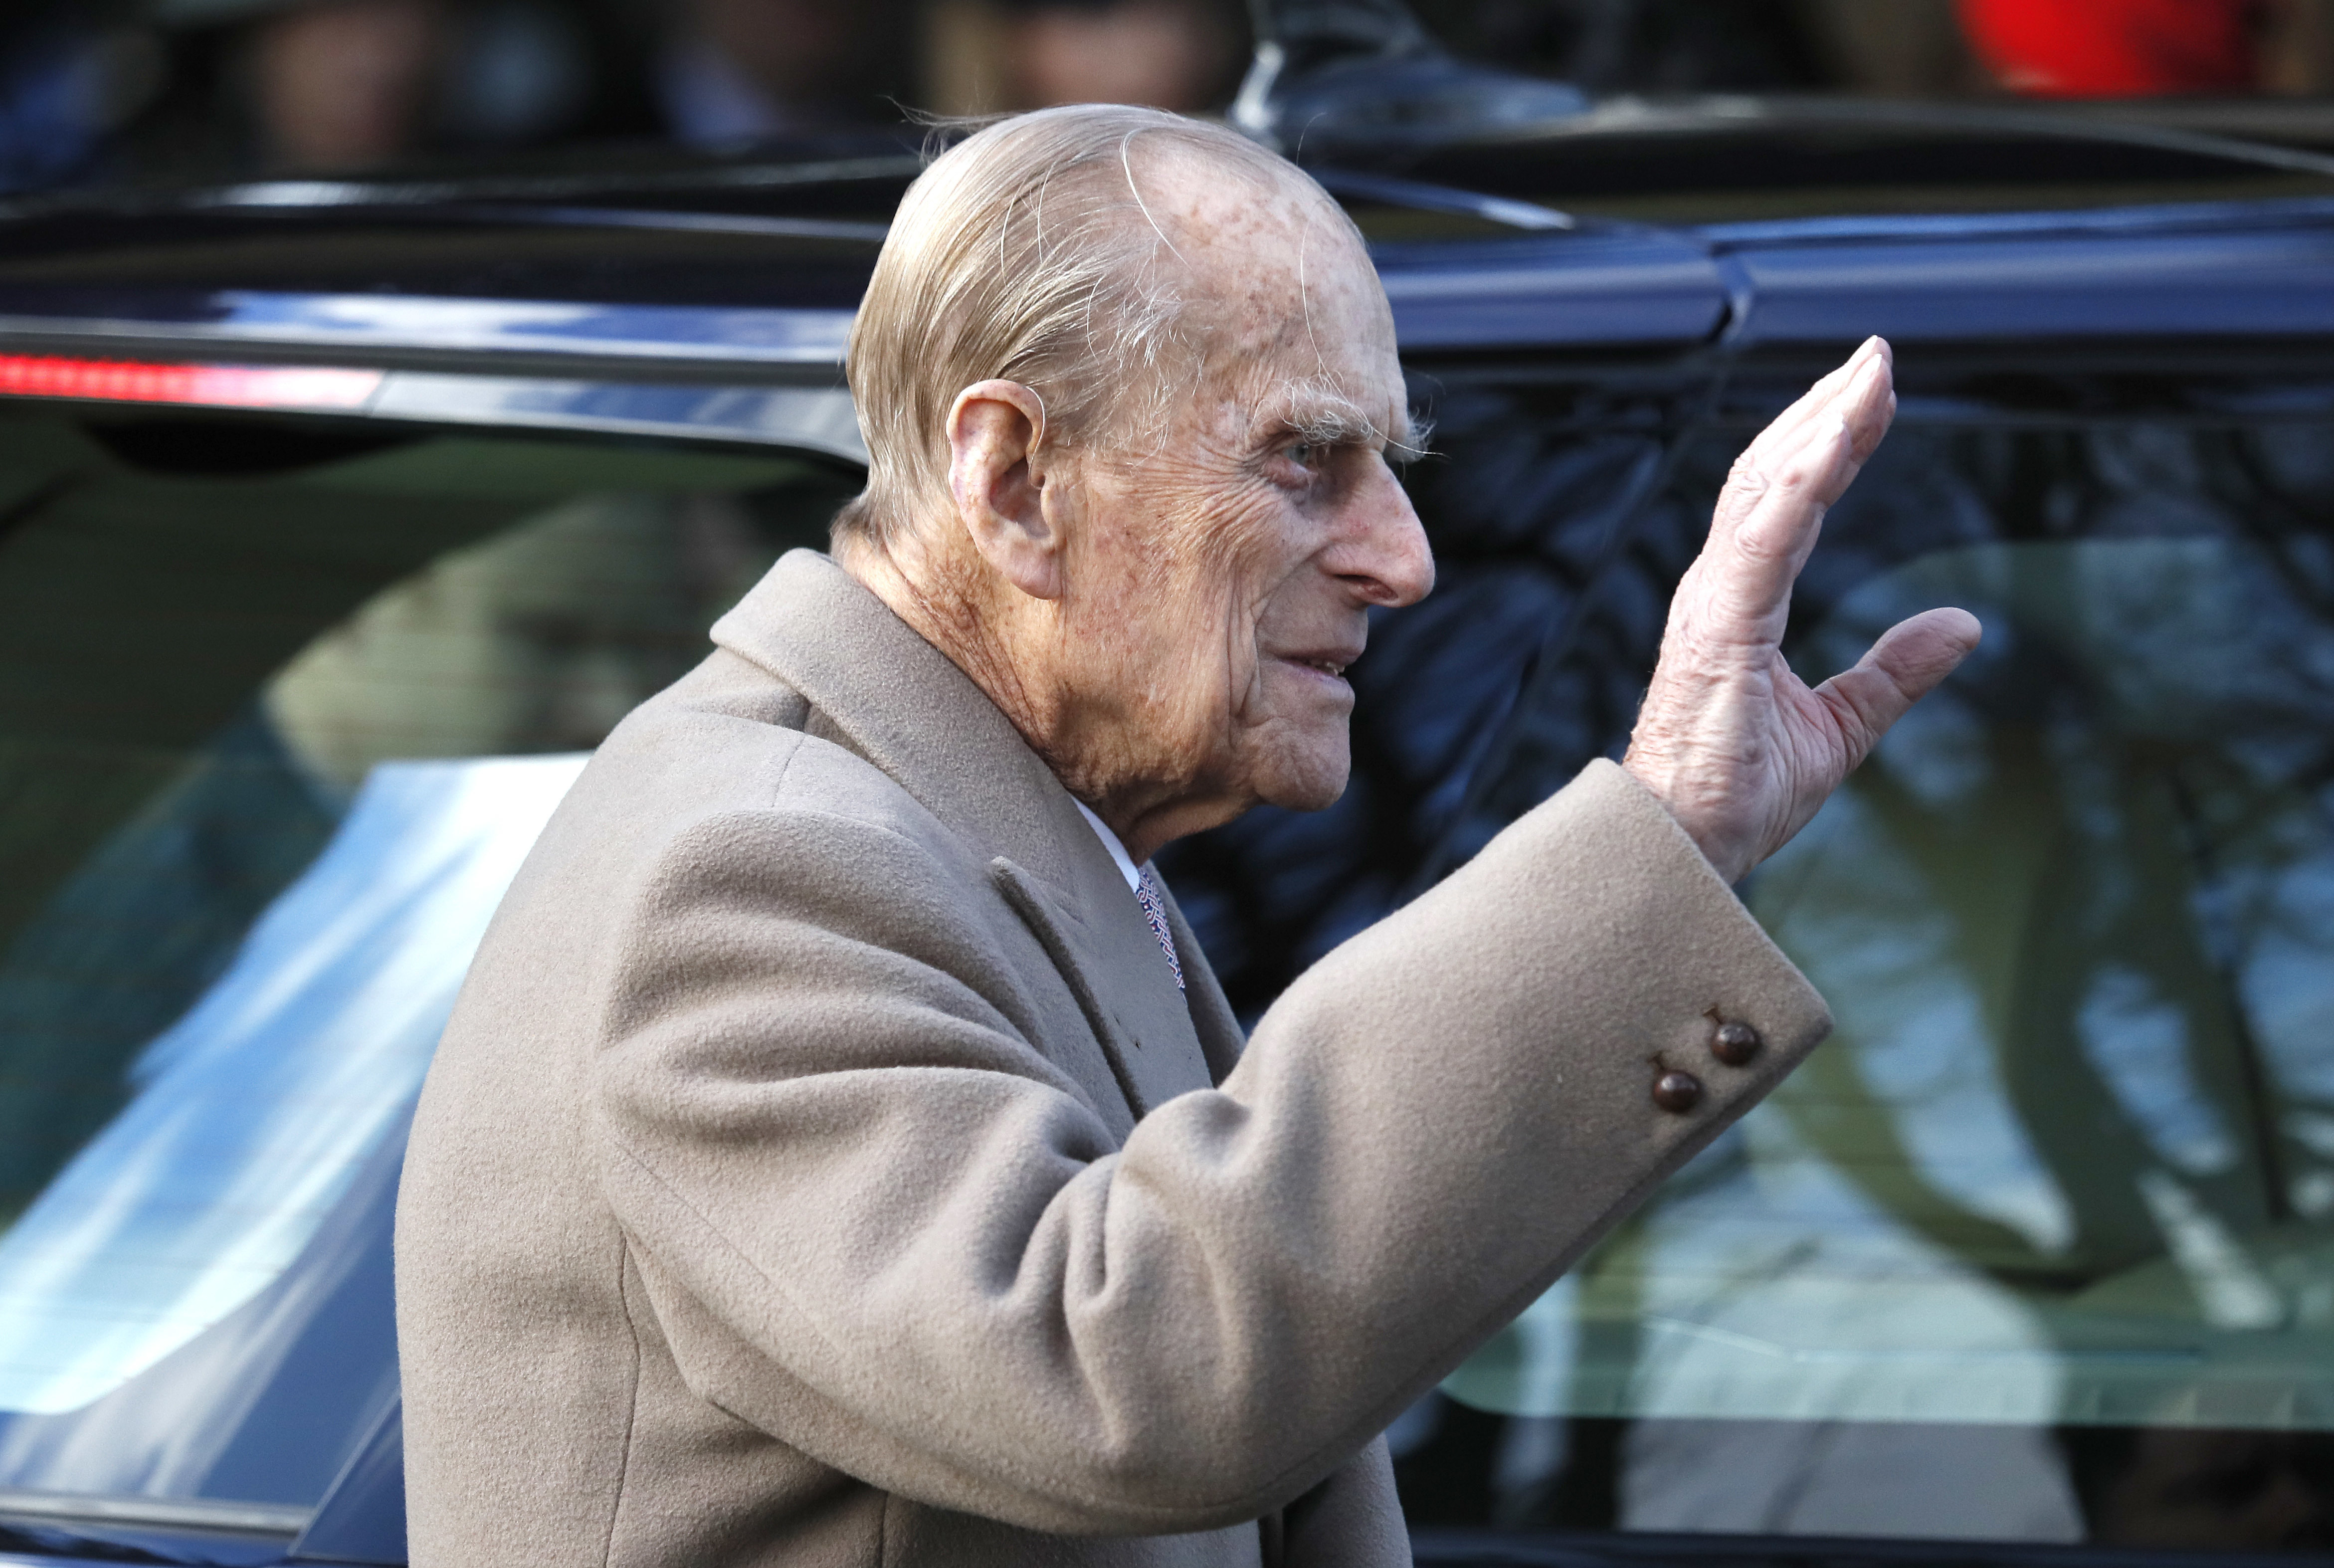 Prince Philip, queen's husband, uninjured after car accident